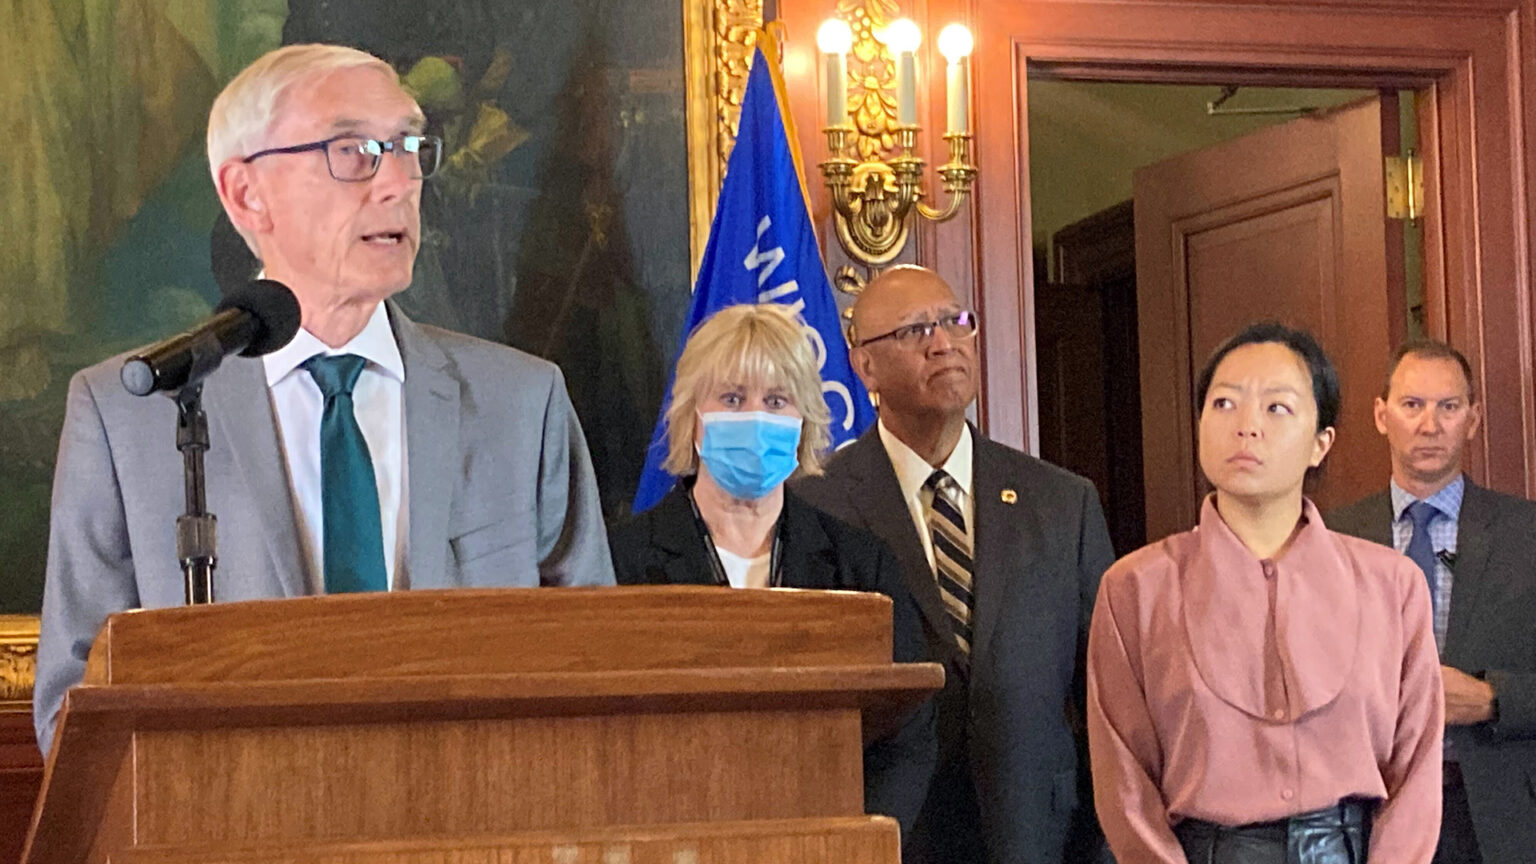 Tony Evers stands behind a wooden podium with a microphone in a room with a painting, a wood-paneled wall and door, sconce-style light fixture and Wisconsin flag, with four other people standing to his left in the background.